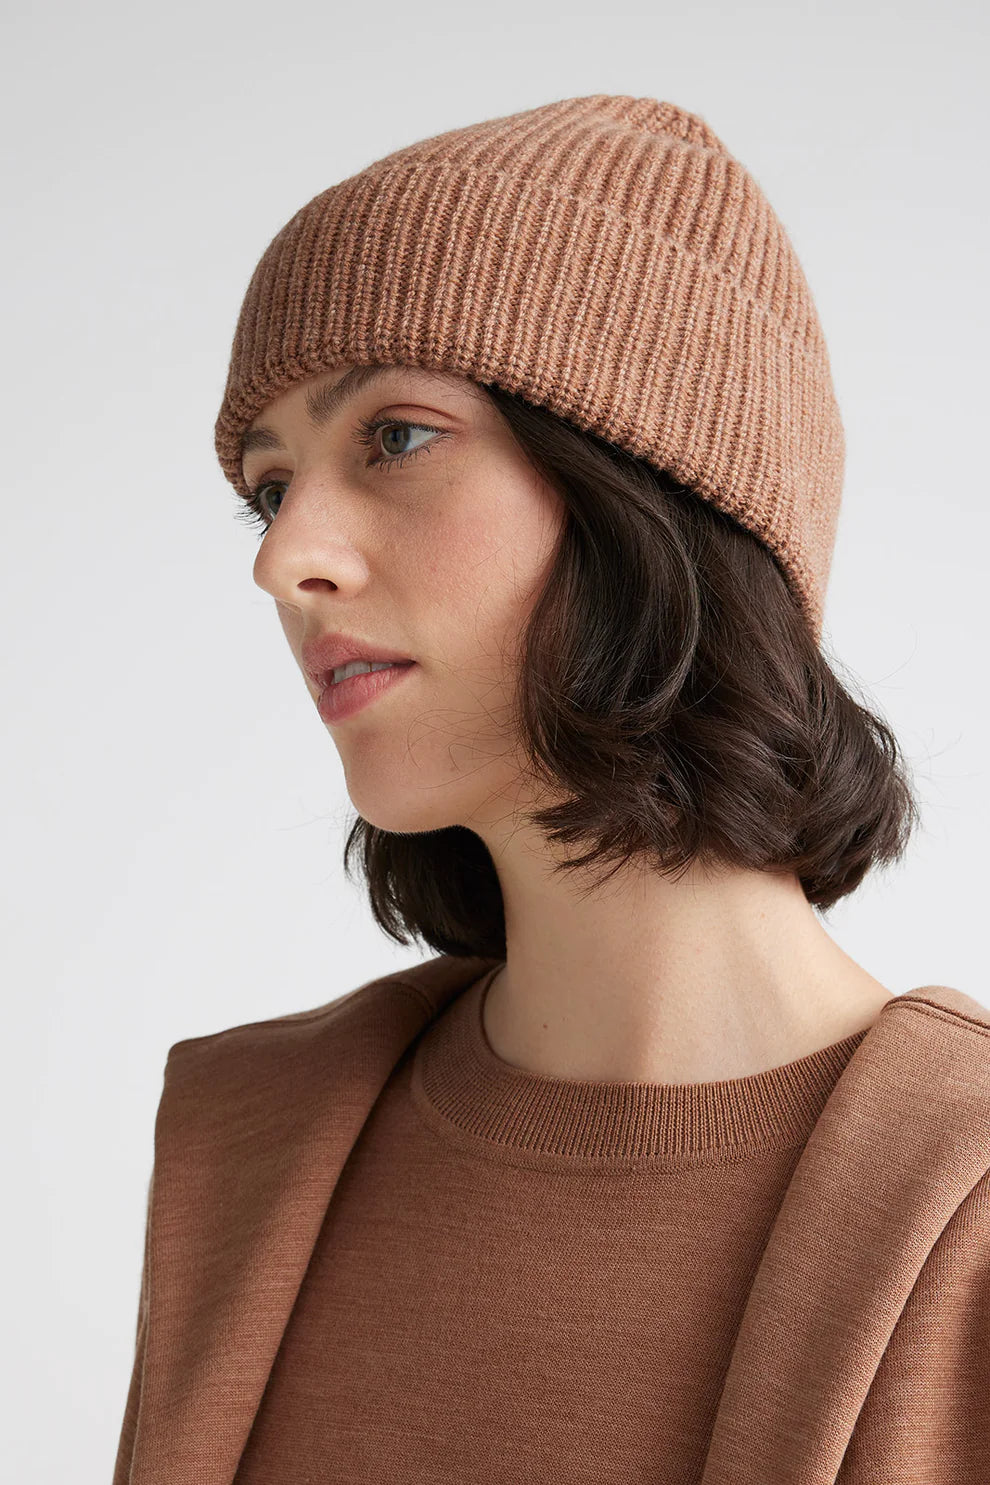 Elevate your winter look with our ribbed wool beanie. Soft, snug, and effortlessly chic. Buy yours today!